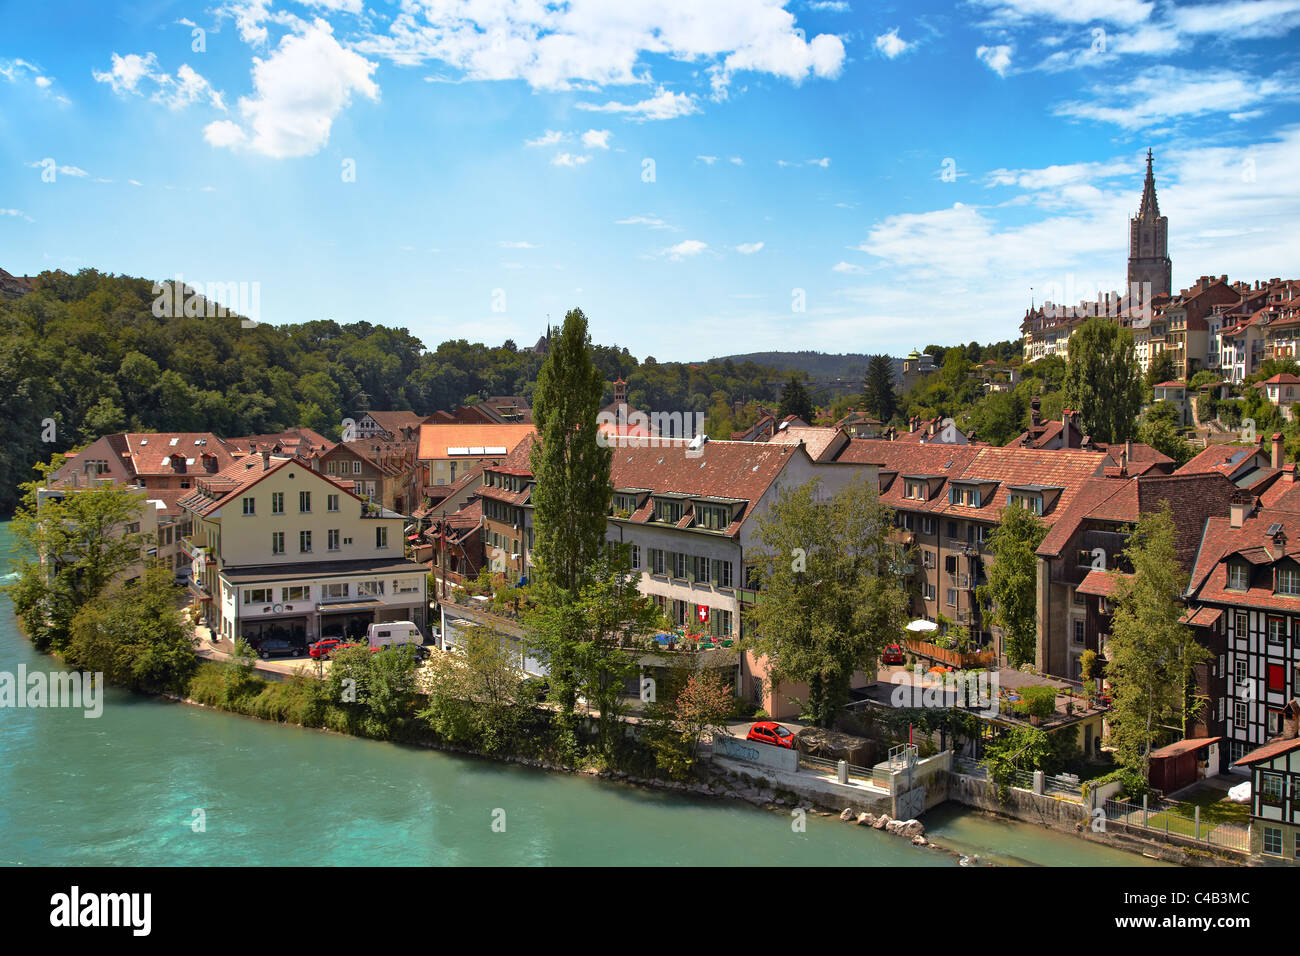 Bern city in Switzerland. View from river. Stock Photo